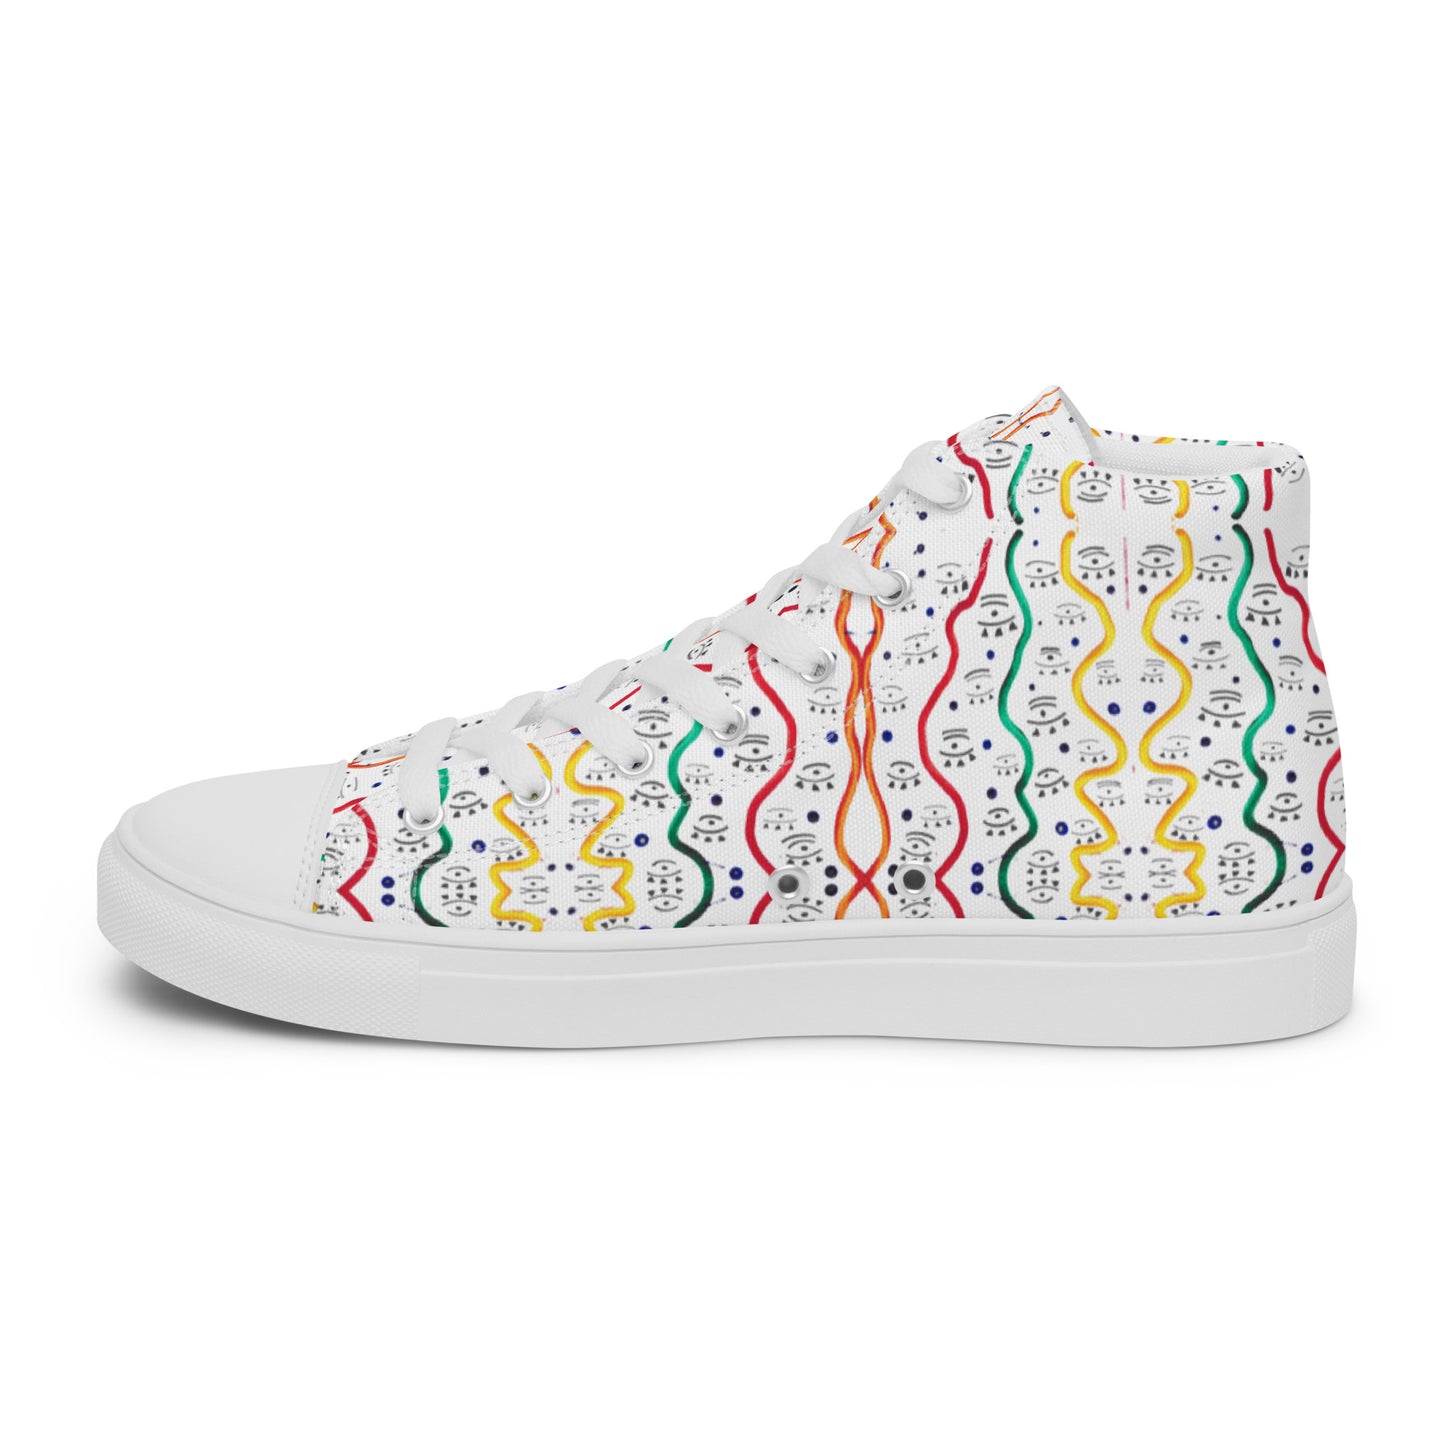 THE EYE - Men's high-top canvas trainers